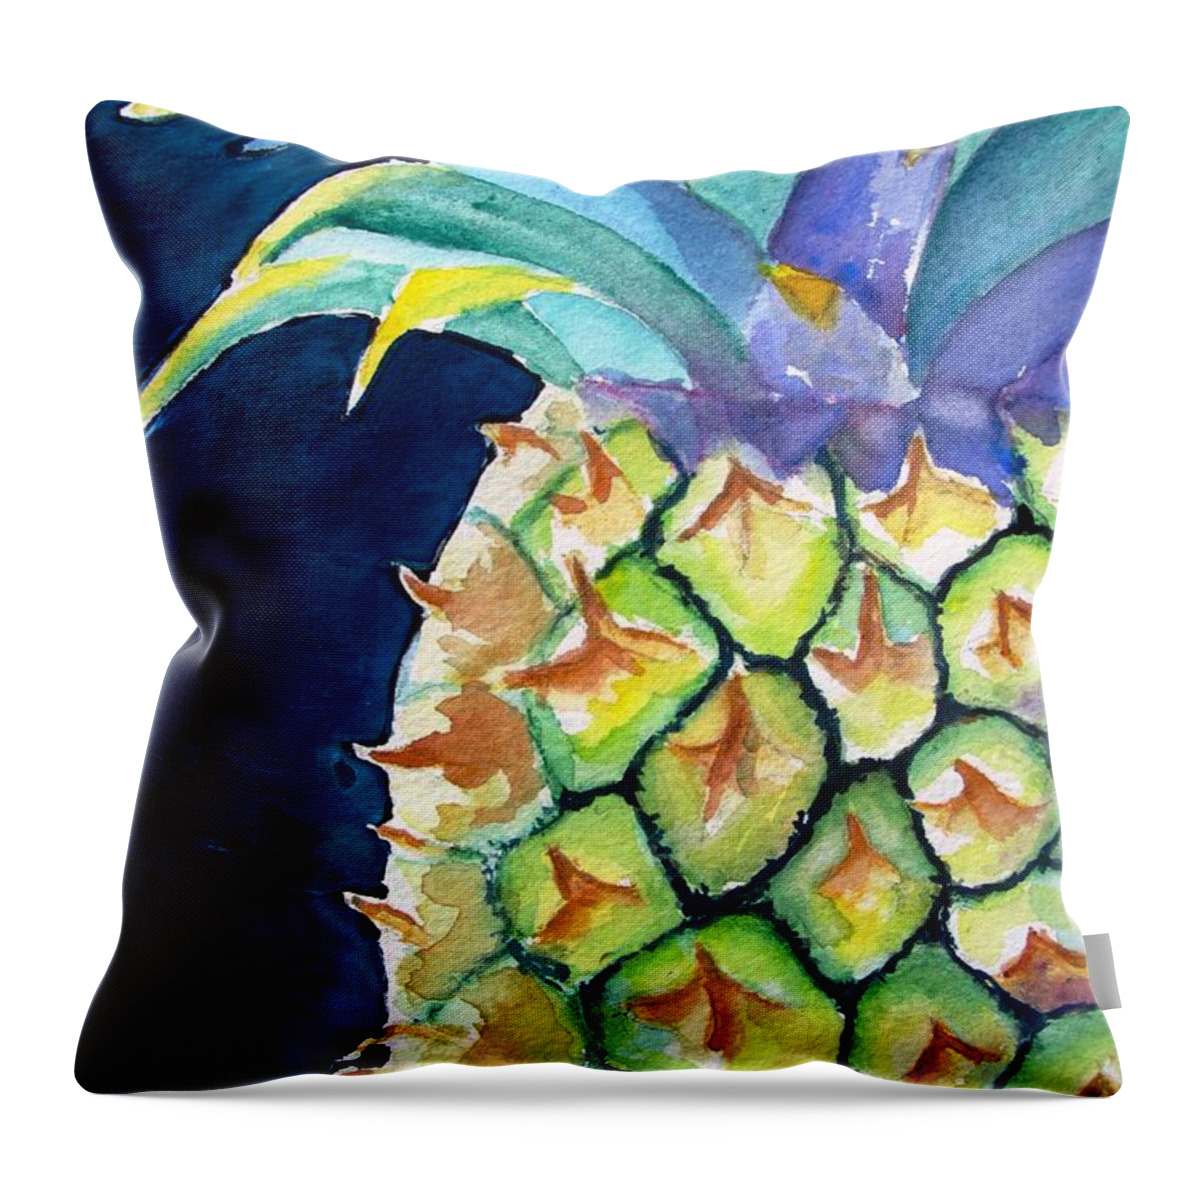 Pineapple Throw Pillow featuring the painting Pineapple by Carlin Blahnik CarlinArtWatercolor